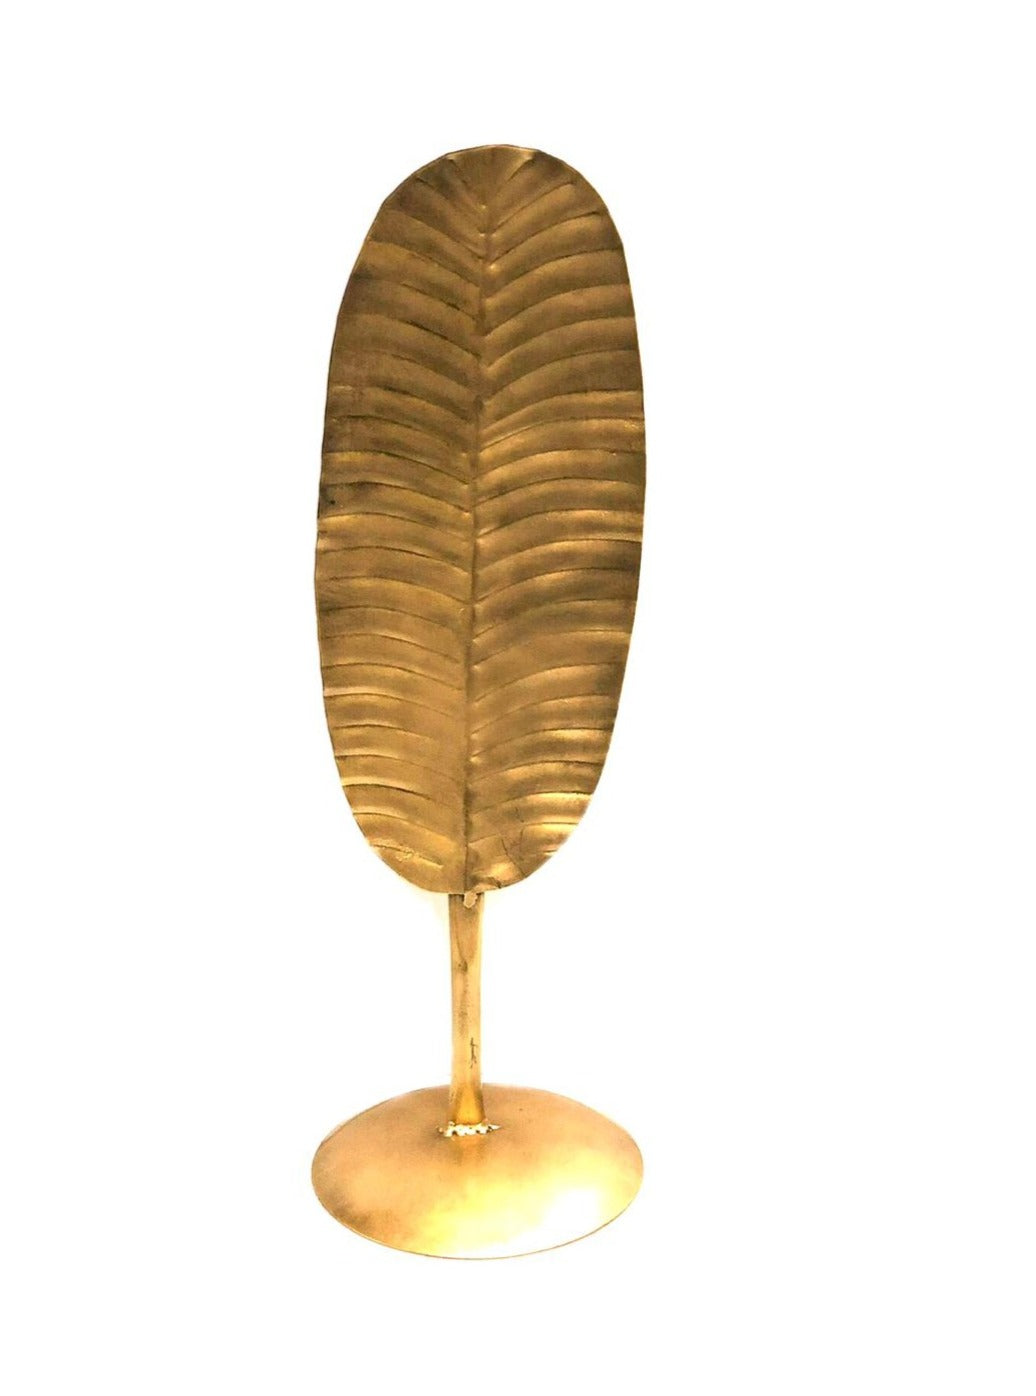 Lifestyle Nature Inspired Leaf Designs Metal Art On Stand Gold From Tamrapatra